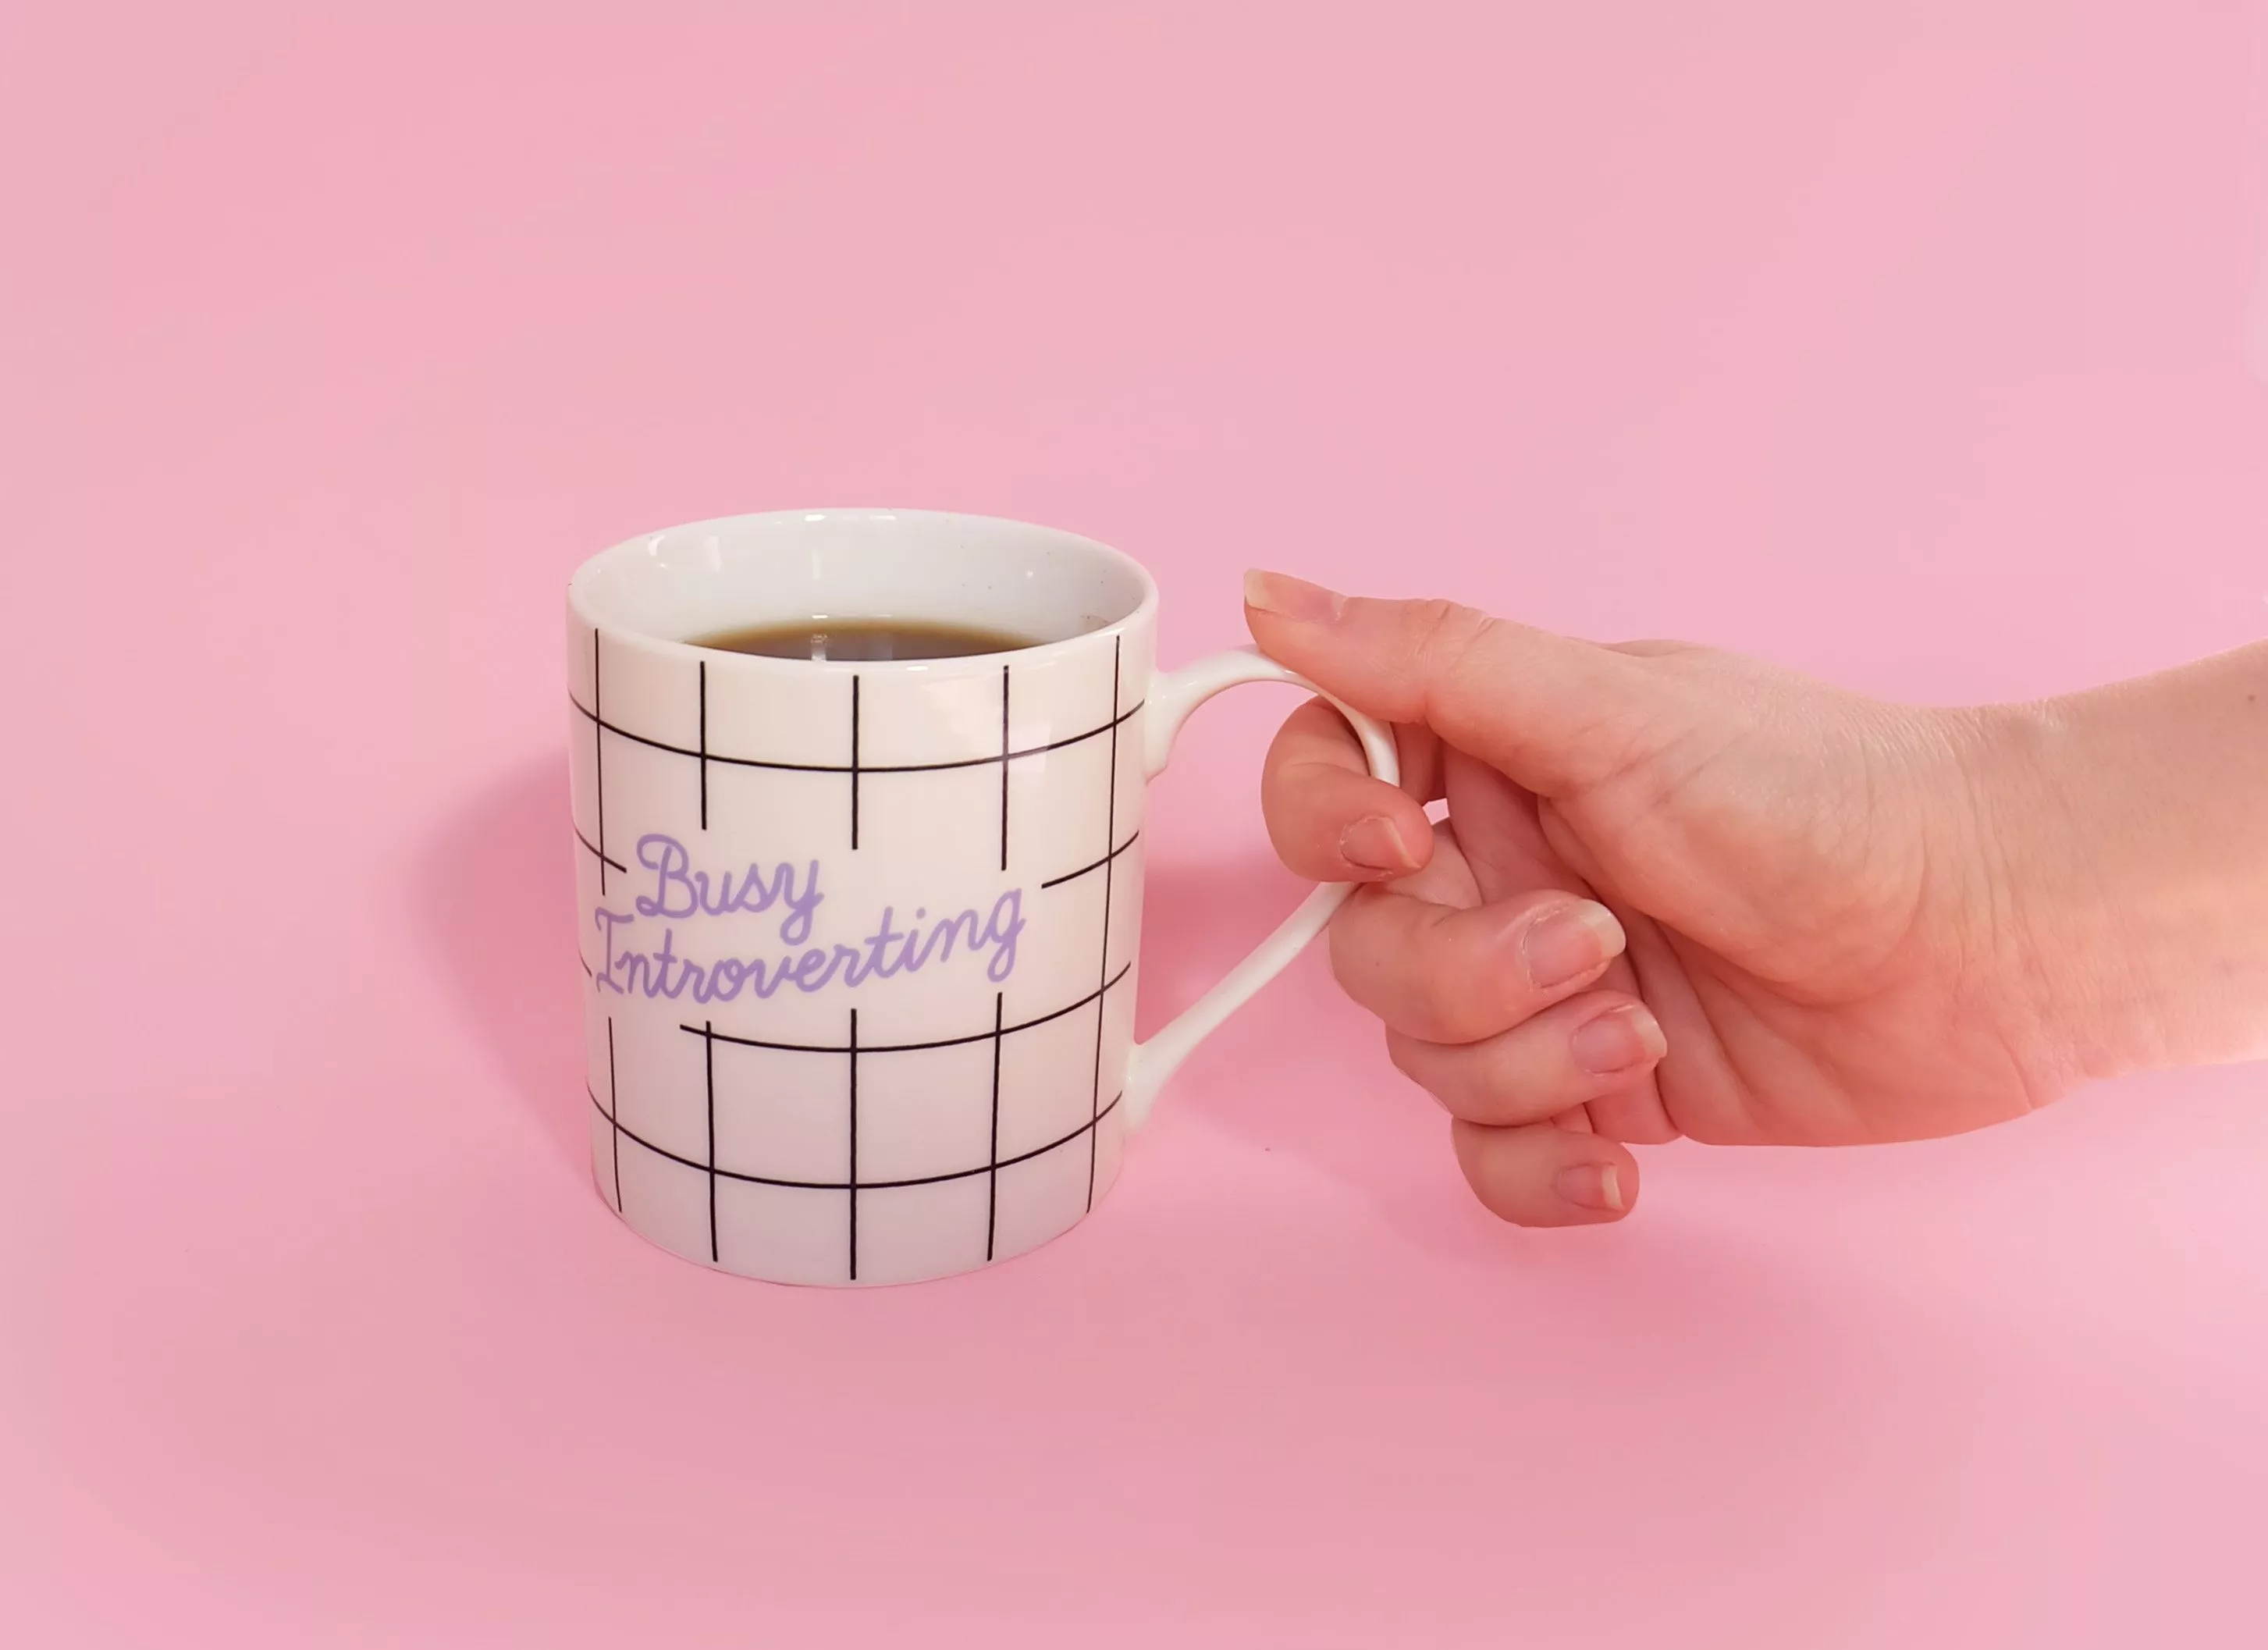 Mug with "busy introverting" on the outside, held by one hand, on a pink background. Photo: Unsplash